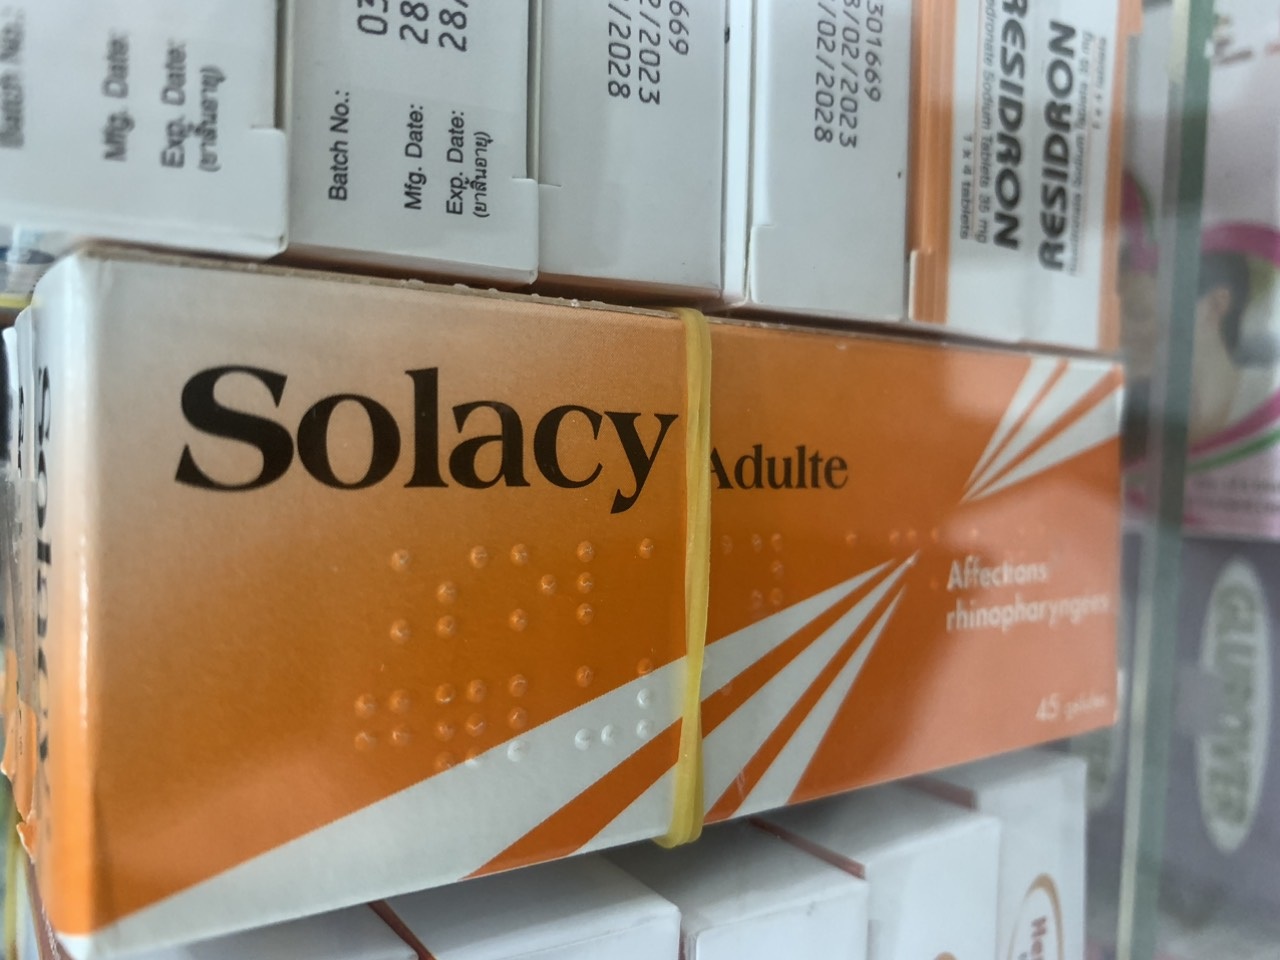 Solacy Adulte 45mg